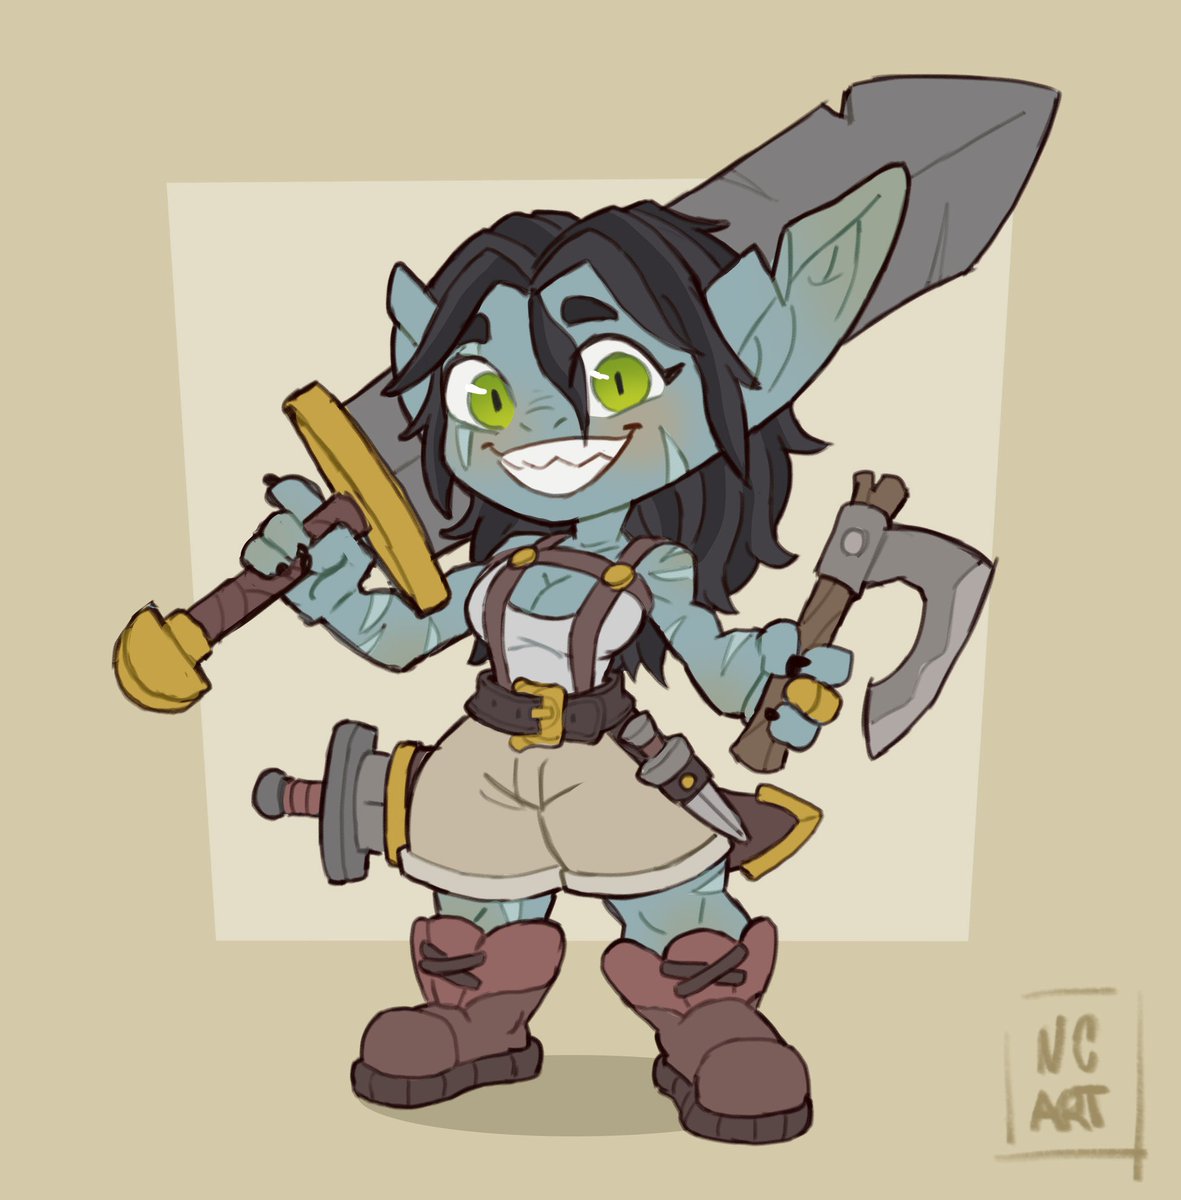 Gobbo commission for @Zigmatism 💙